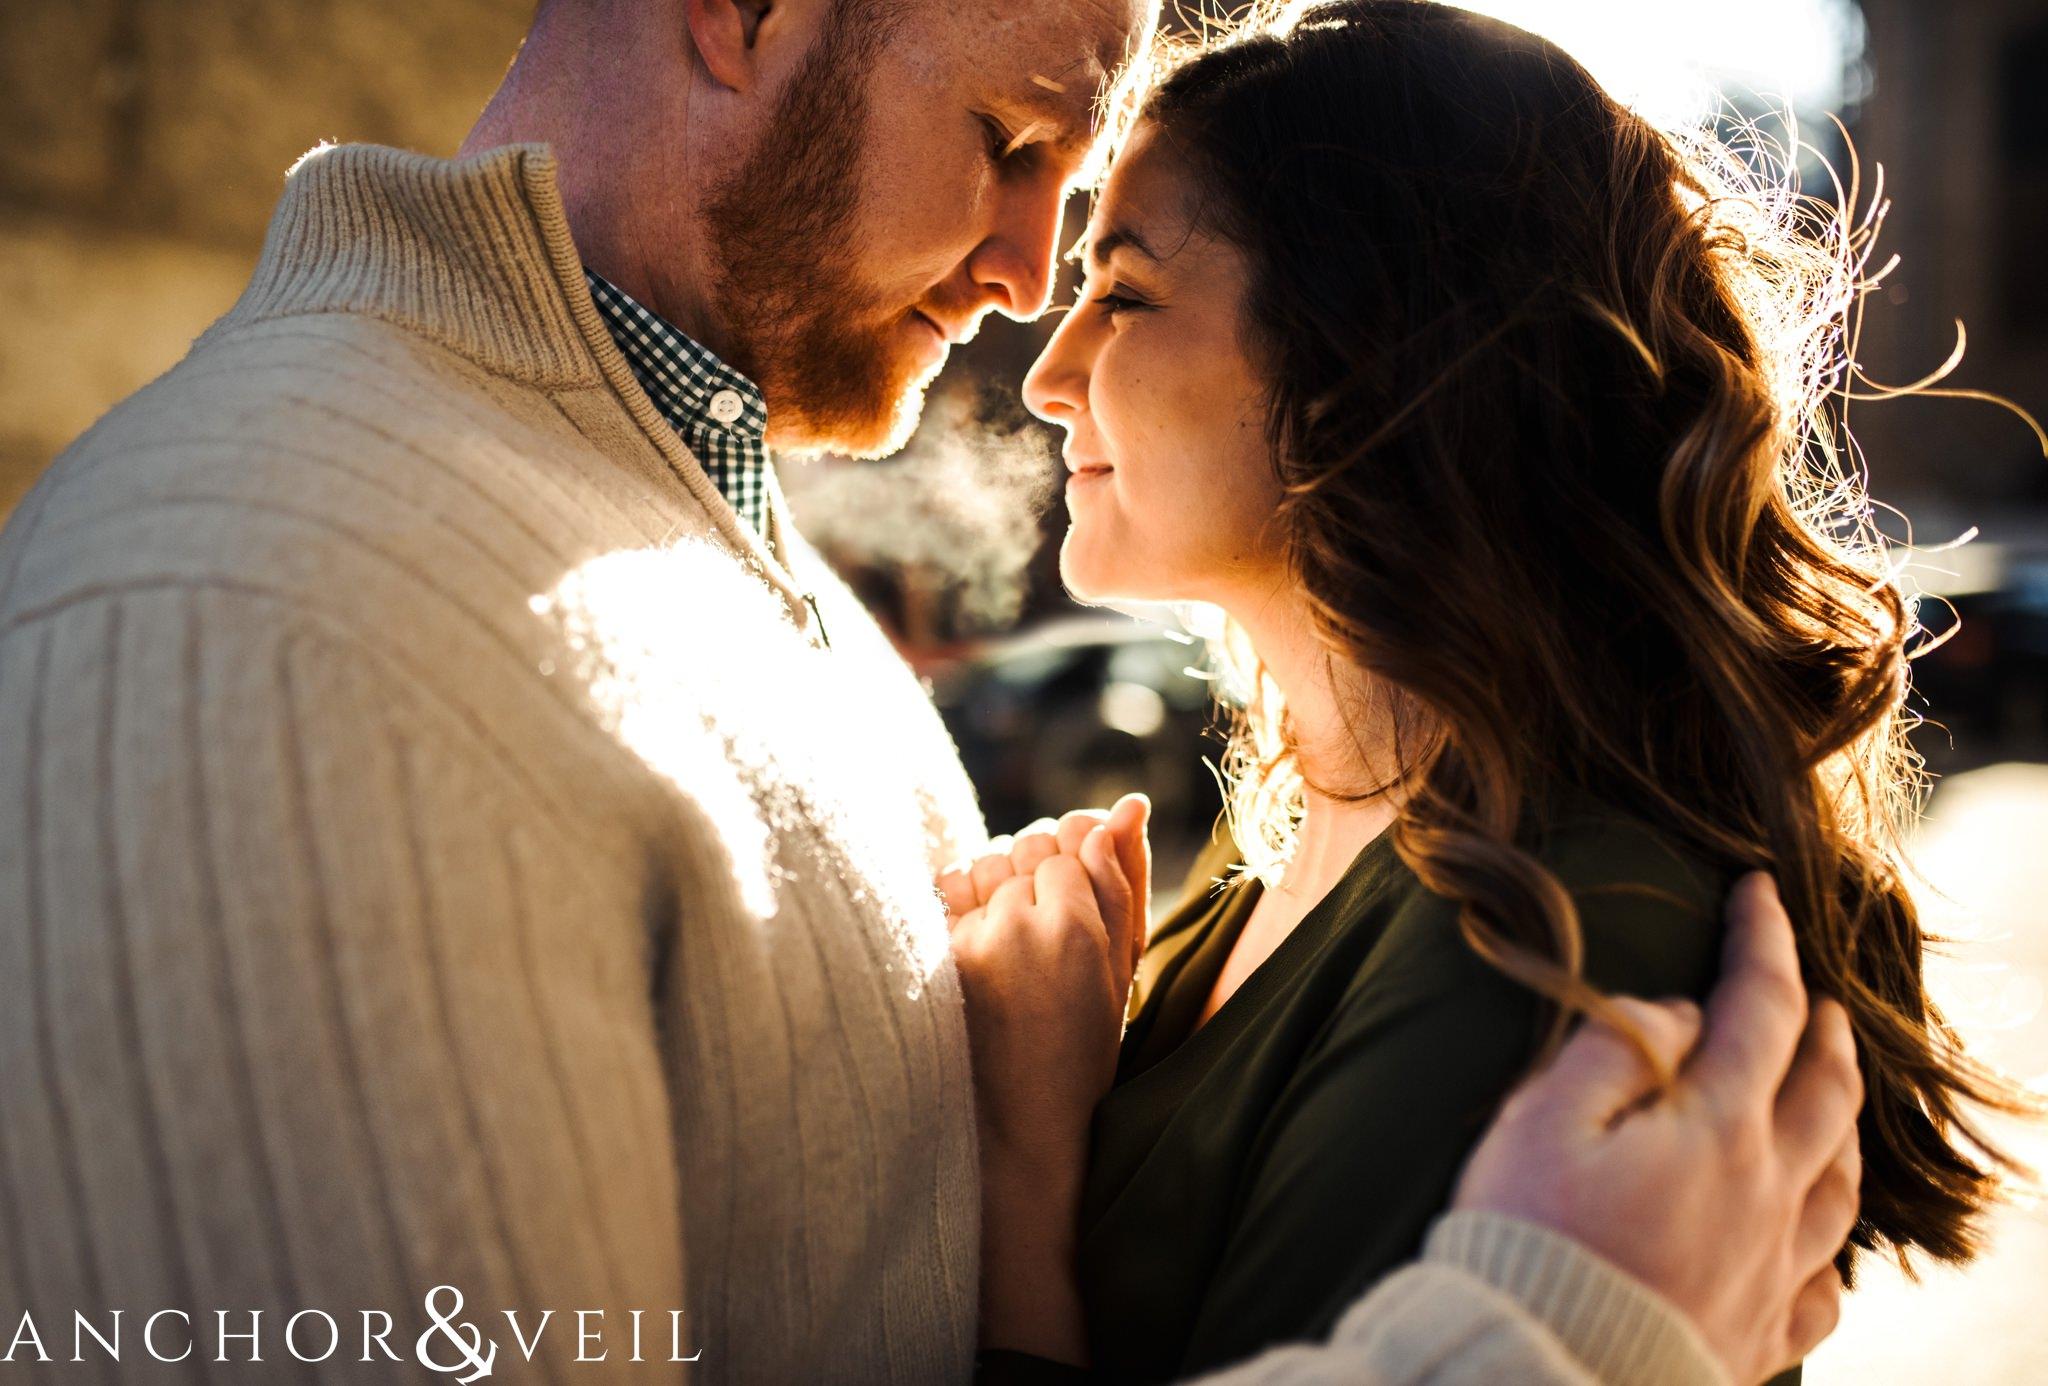 steam from the cold as they hug each other During their Dumbo Brooklyn New York engagement session